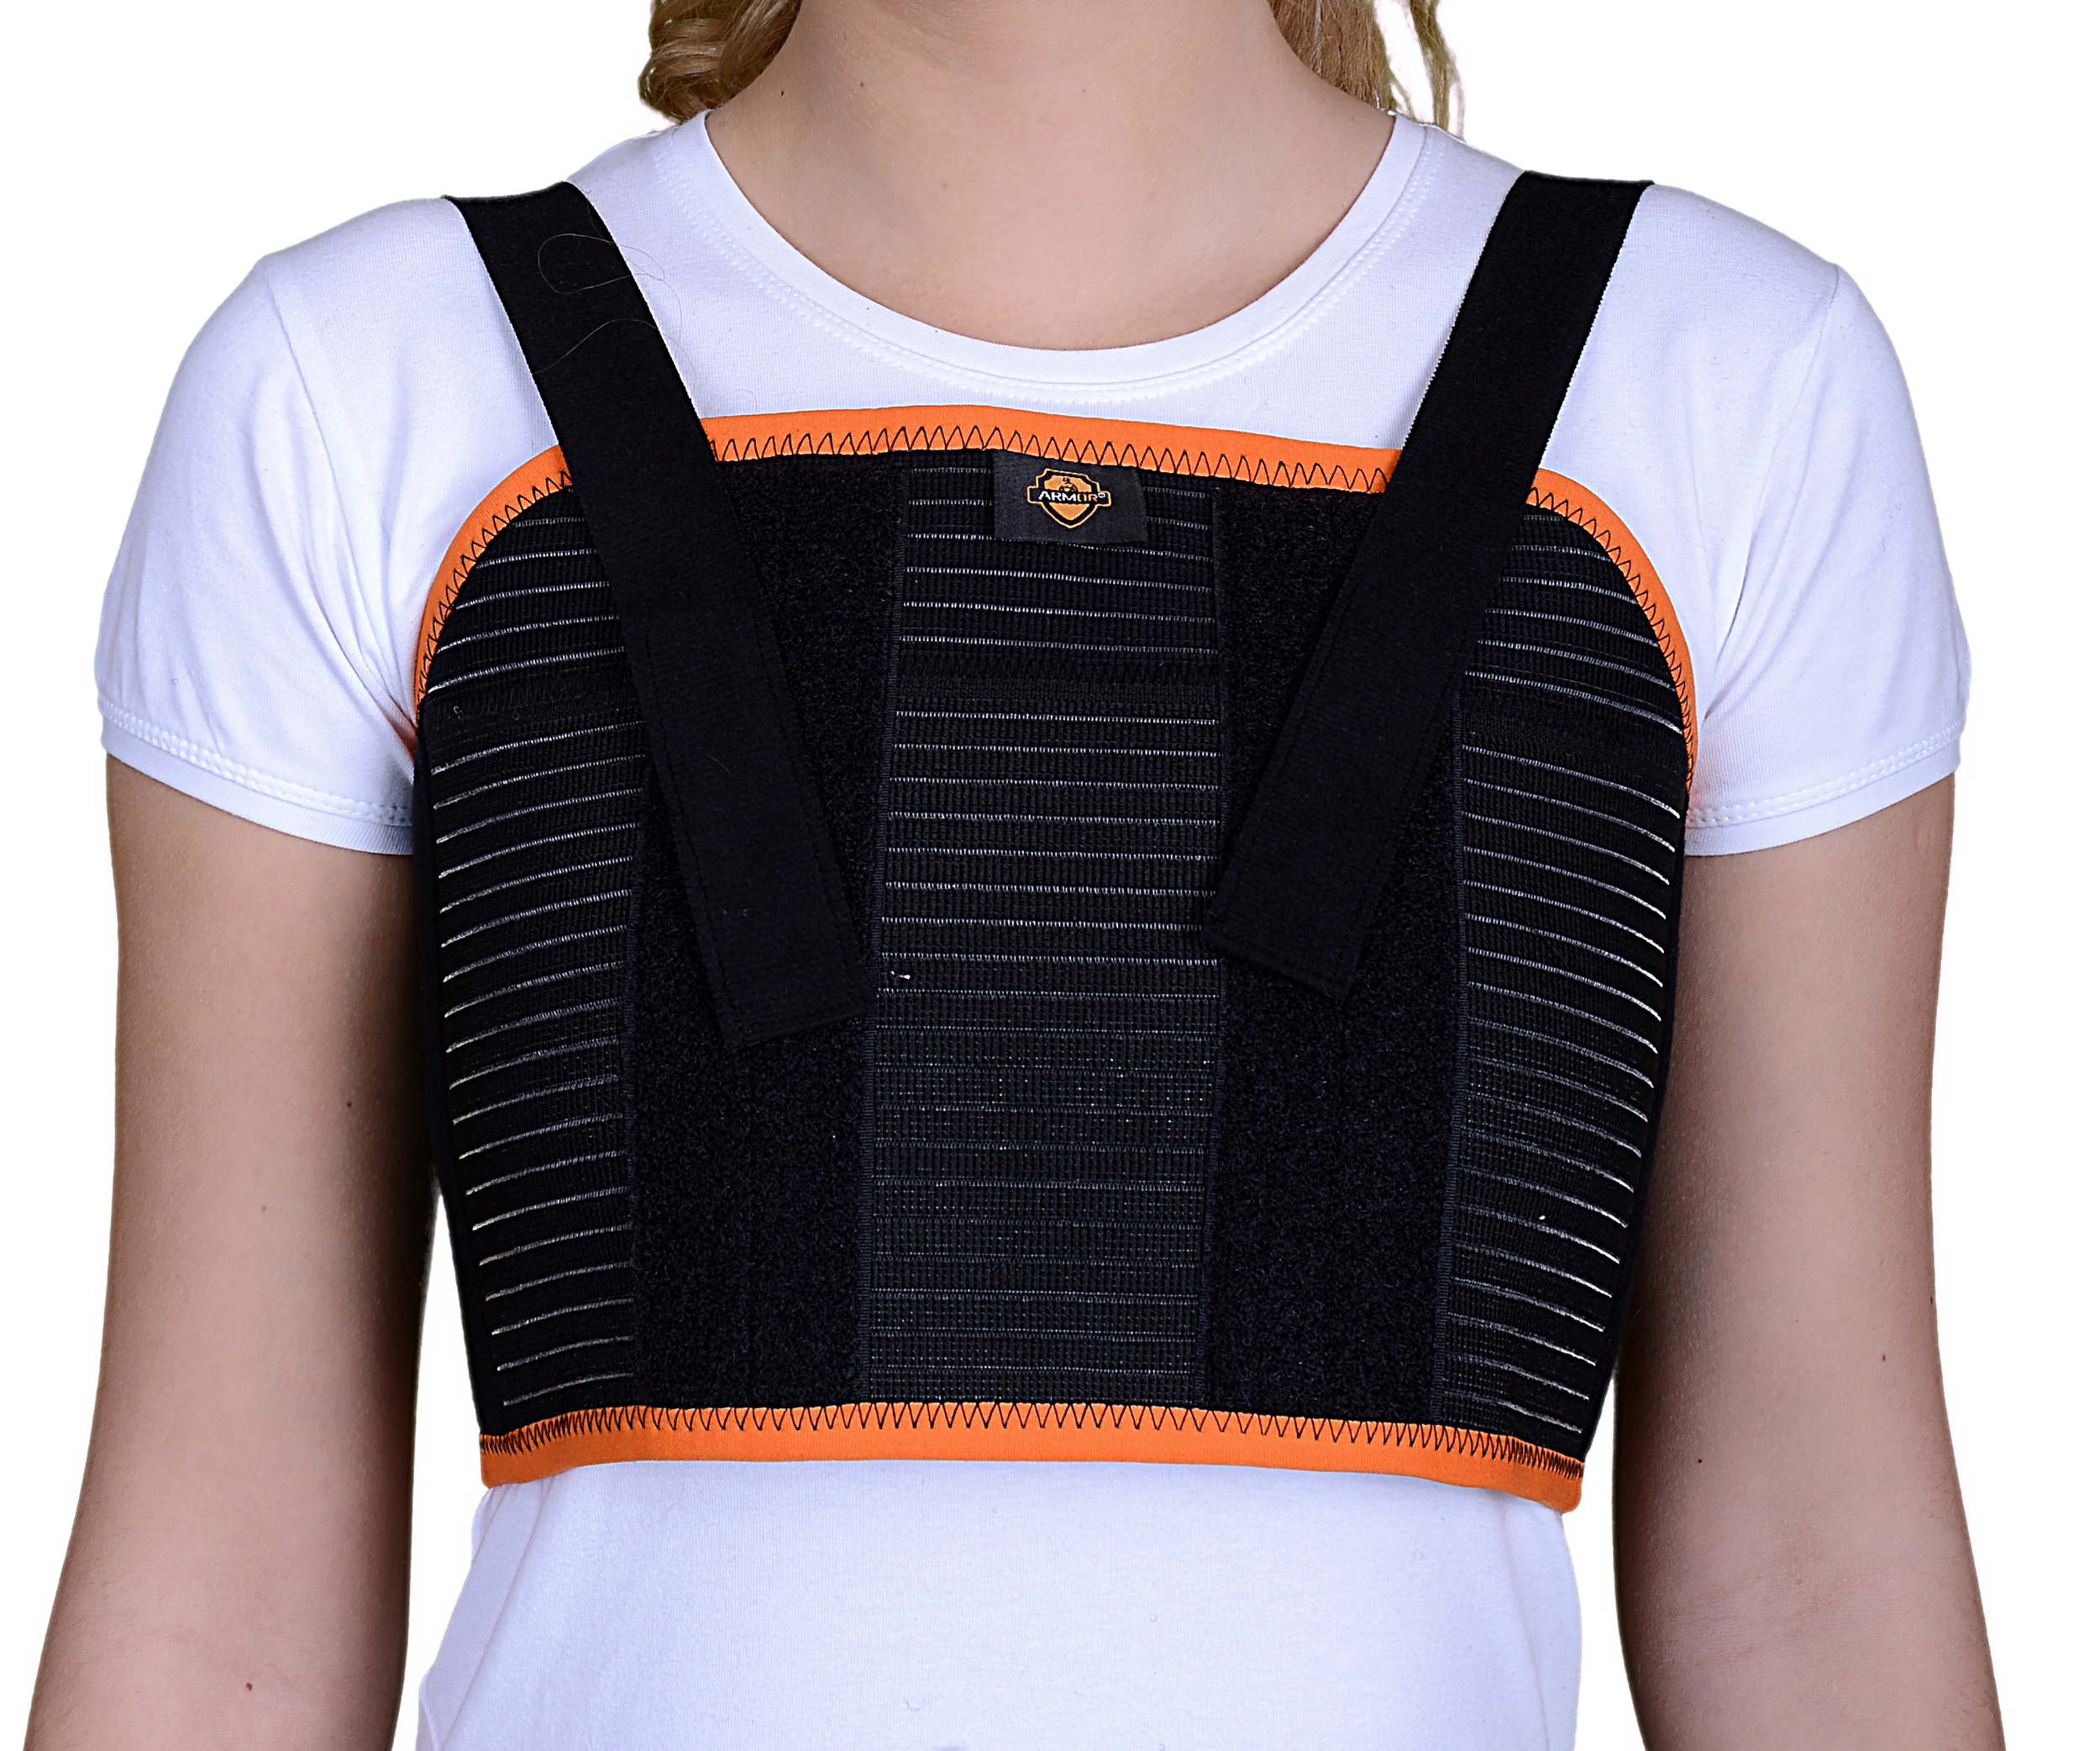 Chest Brace, Breathable Provide Support Skin Friendly Thorax